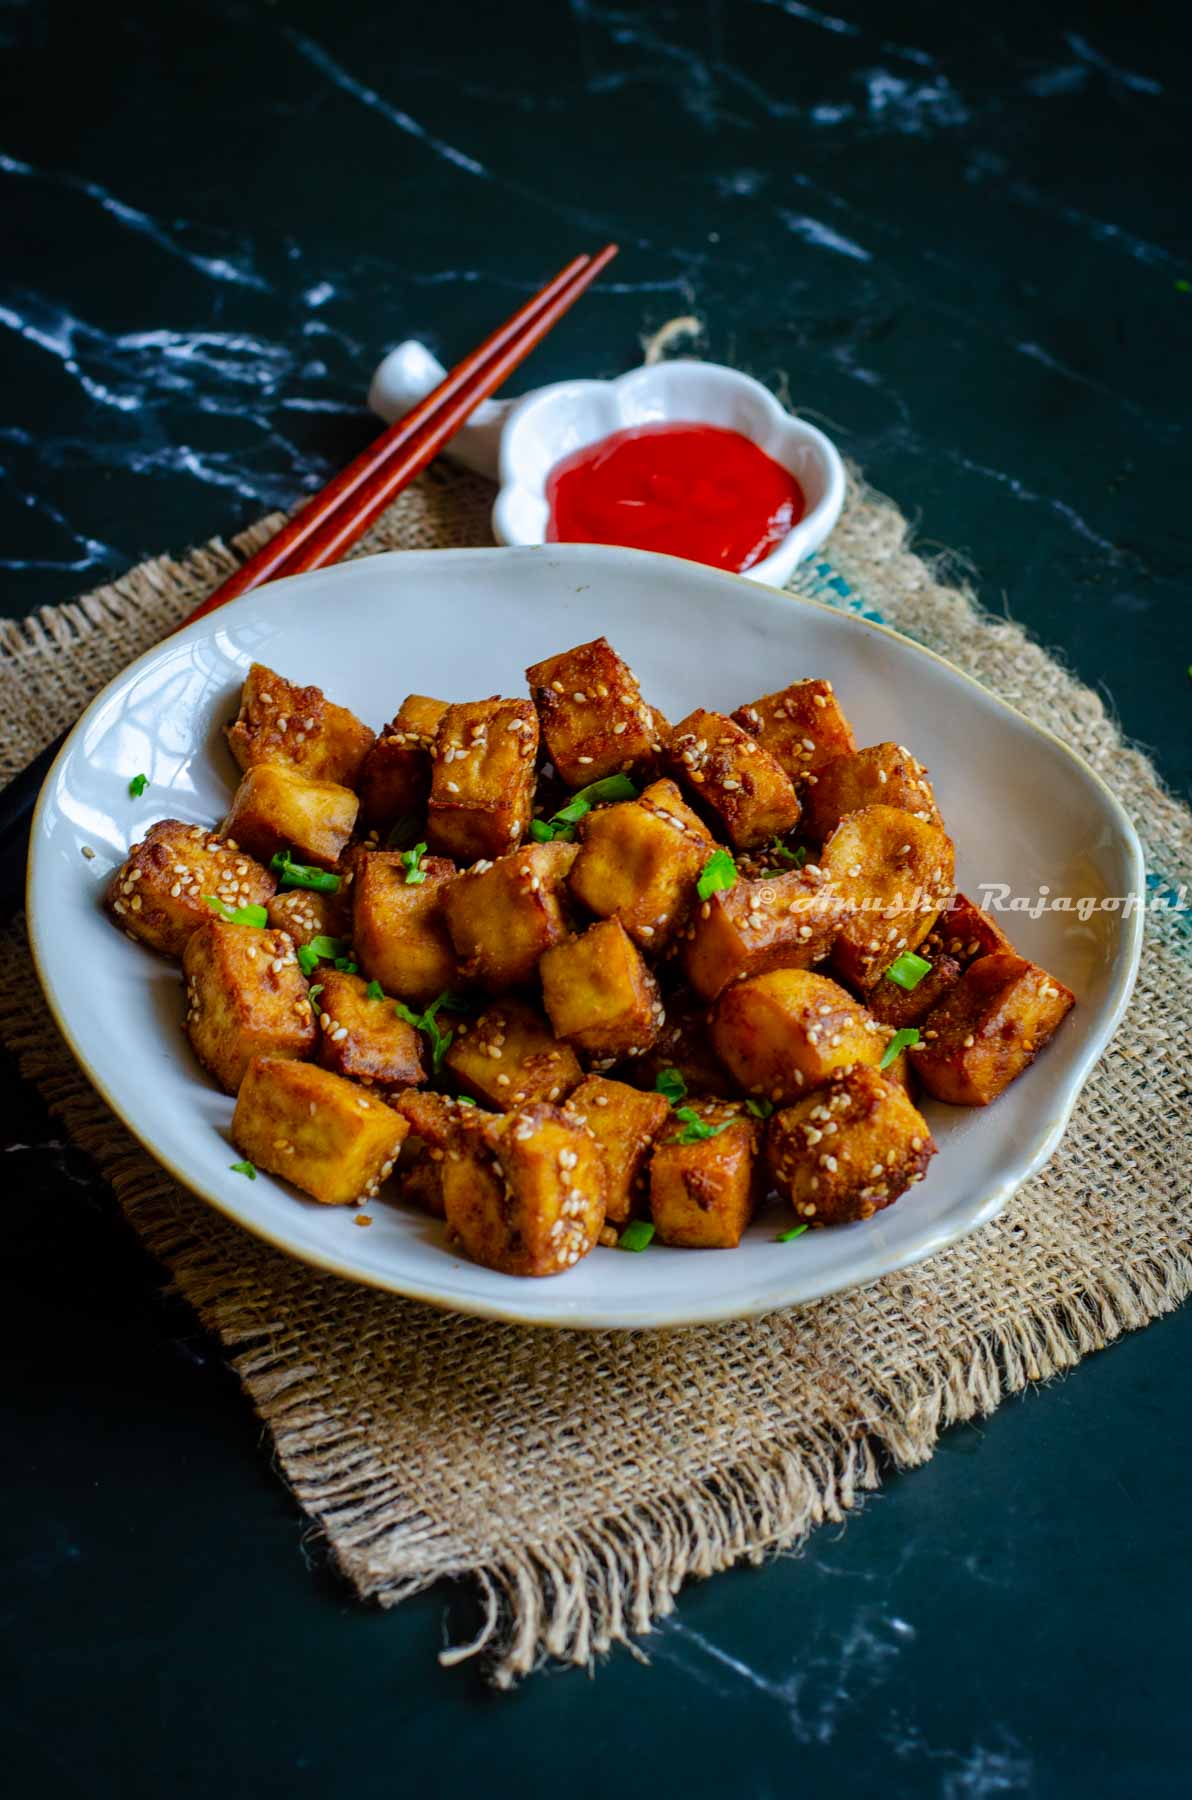 air fried tofu served in an asymmetric rimmed bowl with red chili sauce. chopsticks on the bowl.